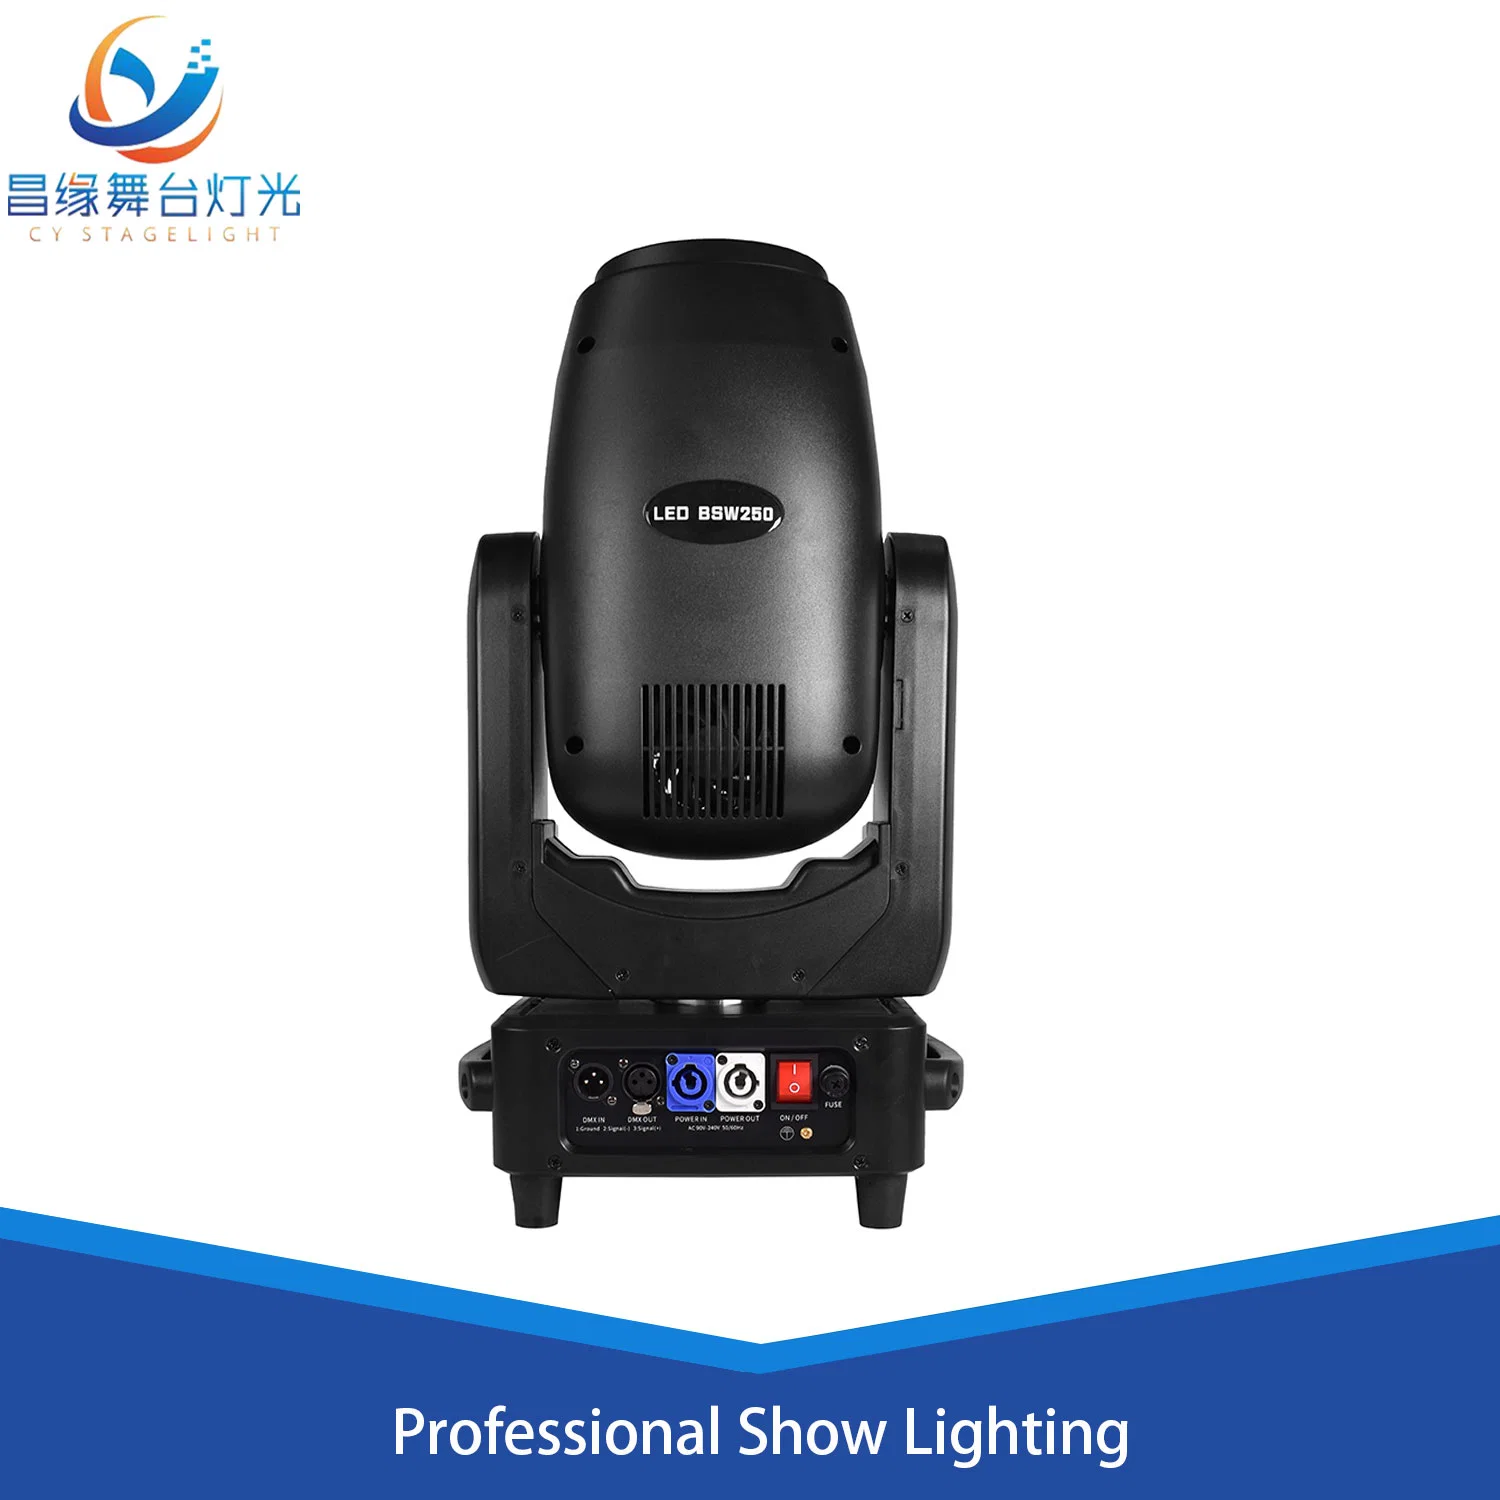 Stufe 3 in 1 Moving Head Light 250W LED BSW Licht